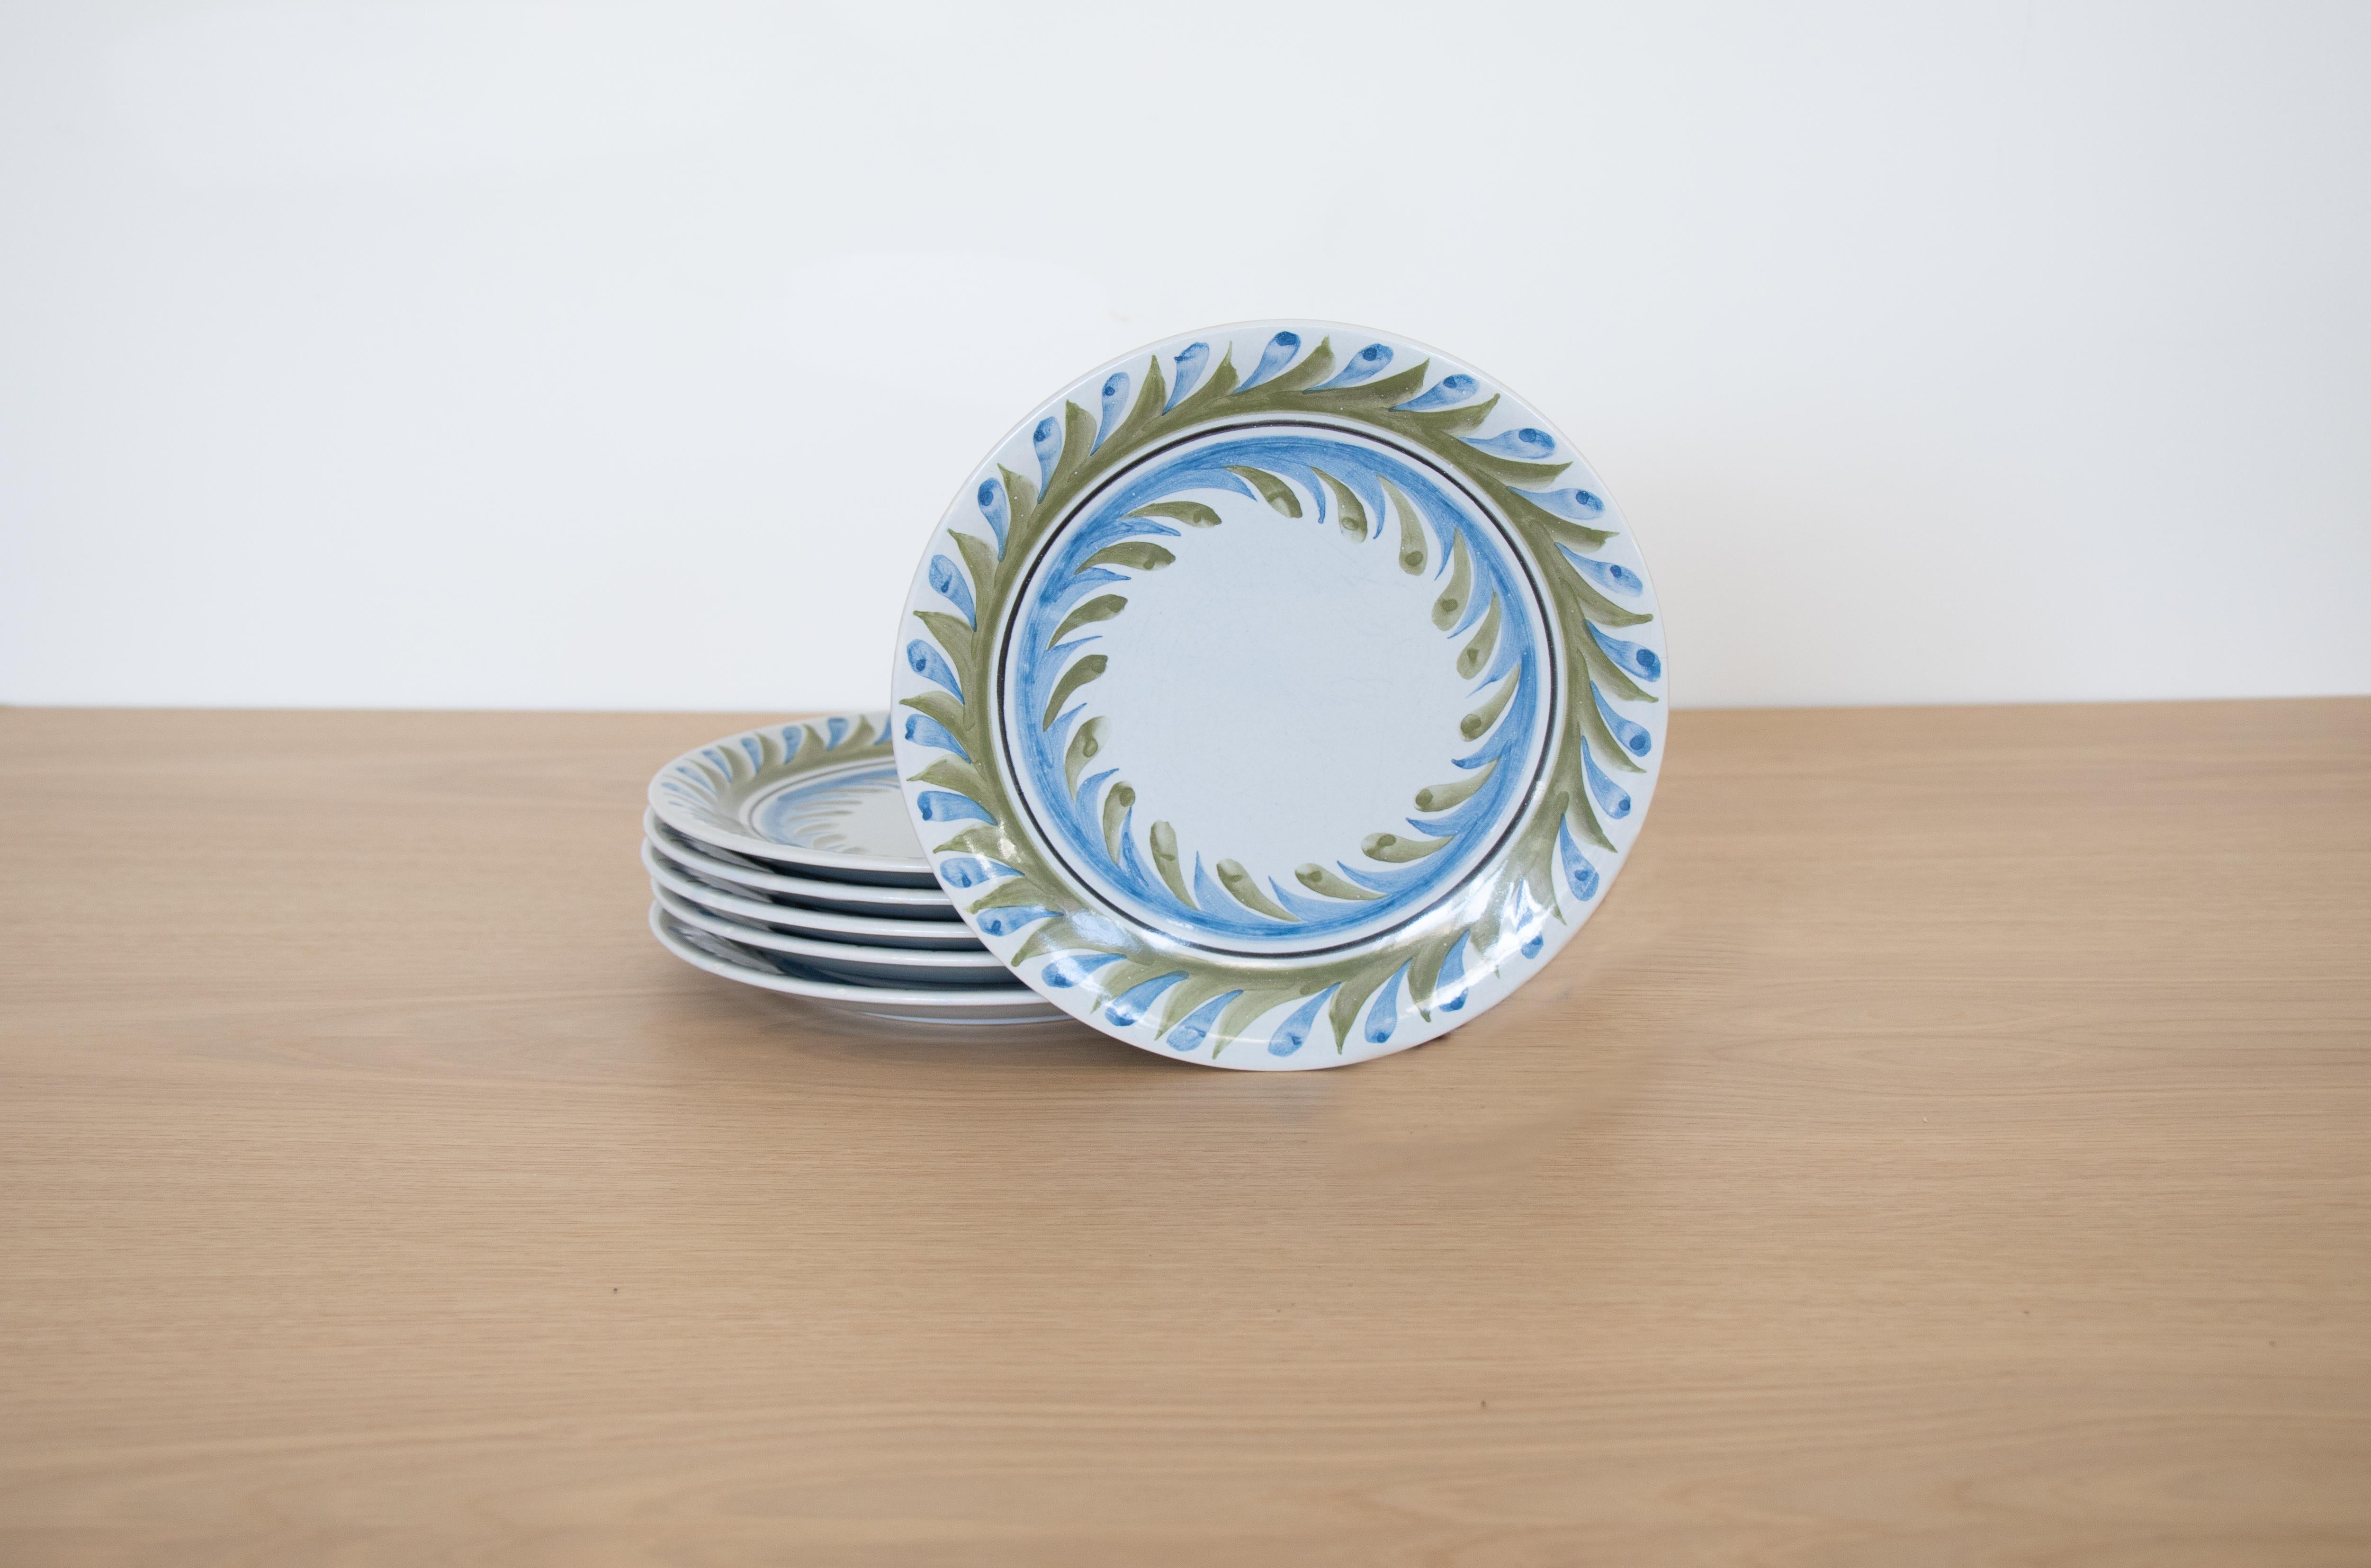 Incredible set of 6 painted plates by Roger Capron from France, 1950s. Beautiful hand painted blue and green leaf motif on slightly tinted blue ceramic plate. Signed on back.